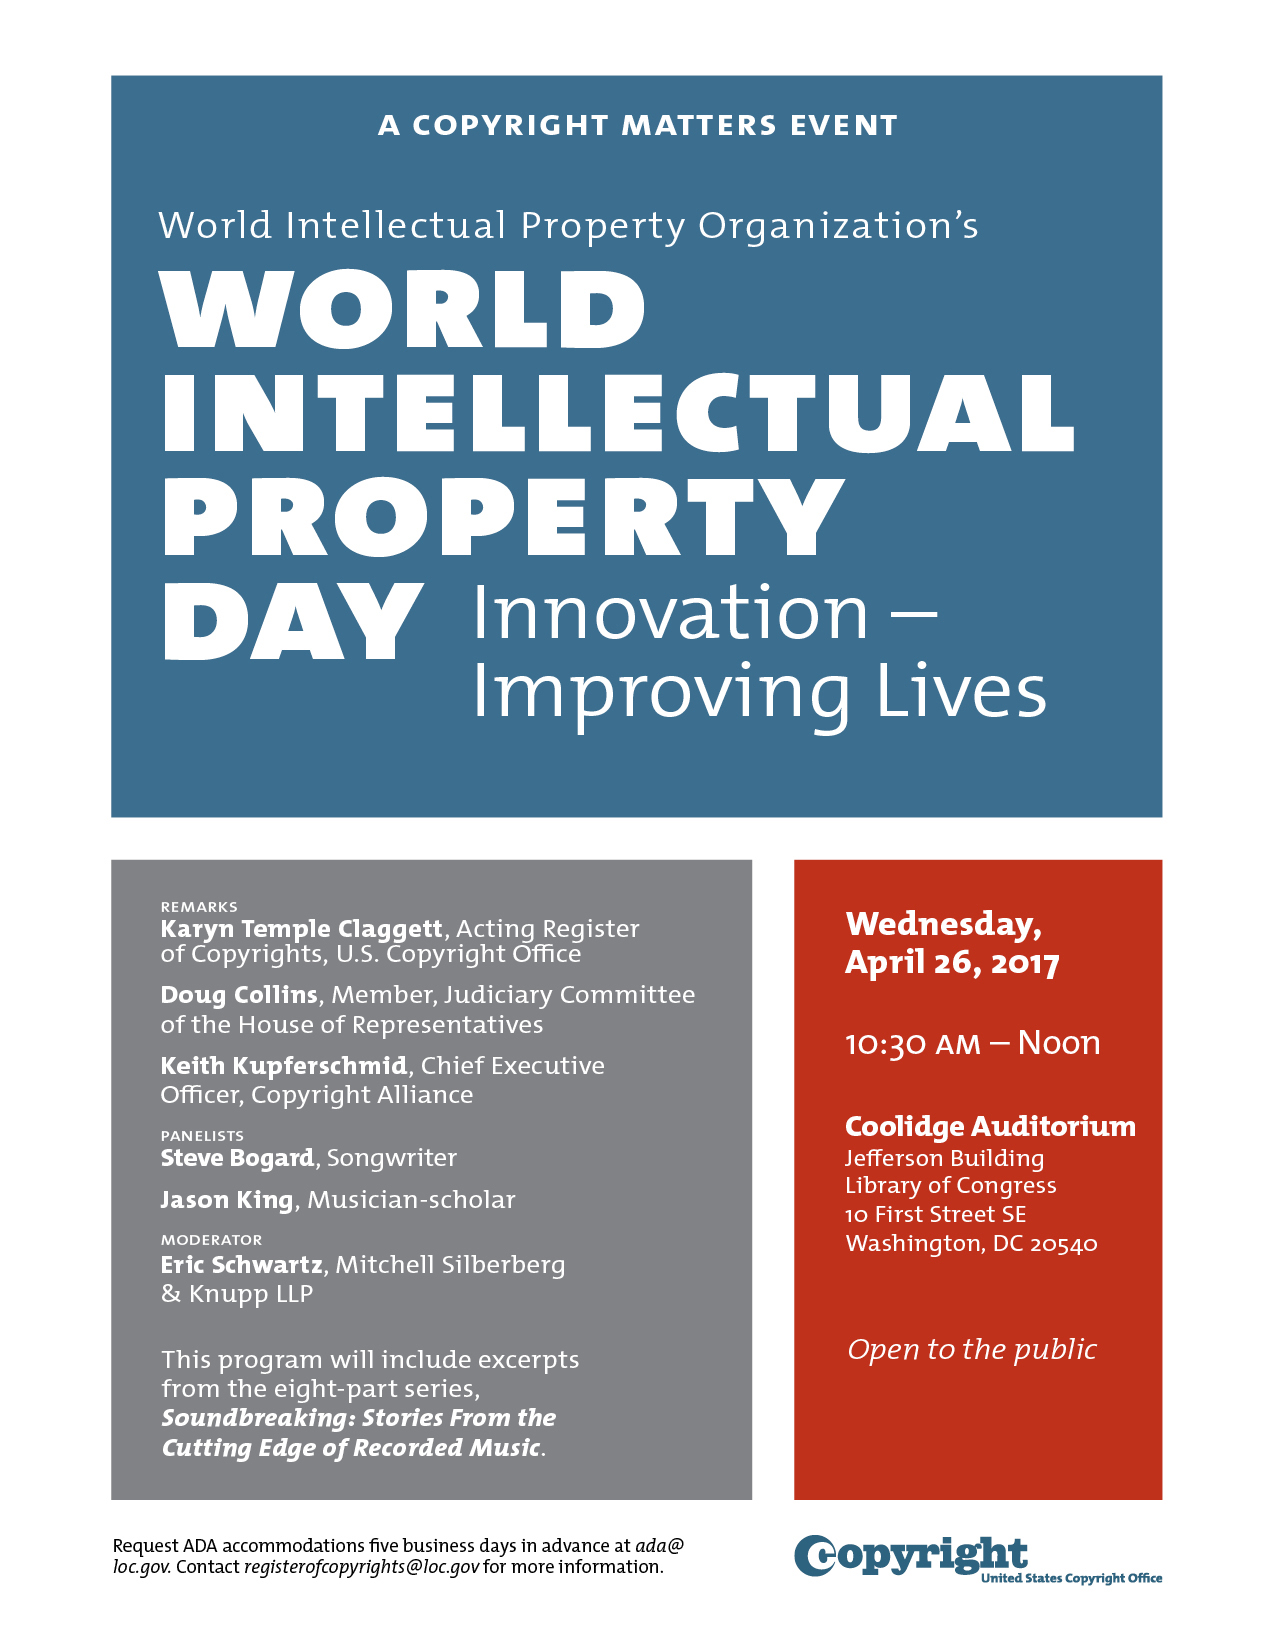 World Intellectual Property Day 2017: Innovation — Improving Lives .  Copyright Office